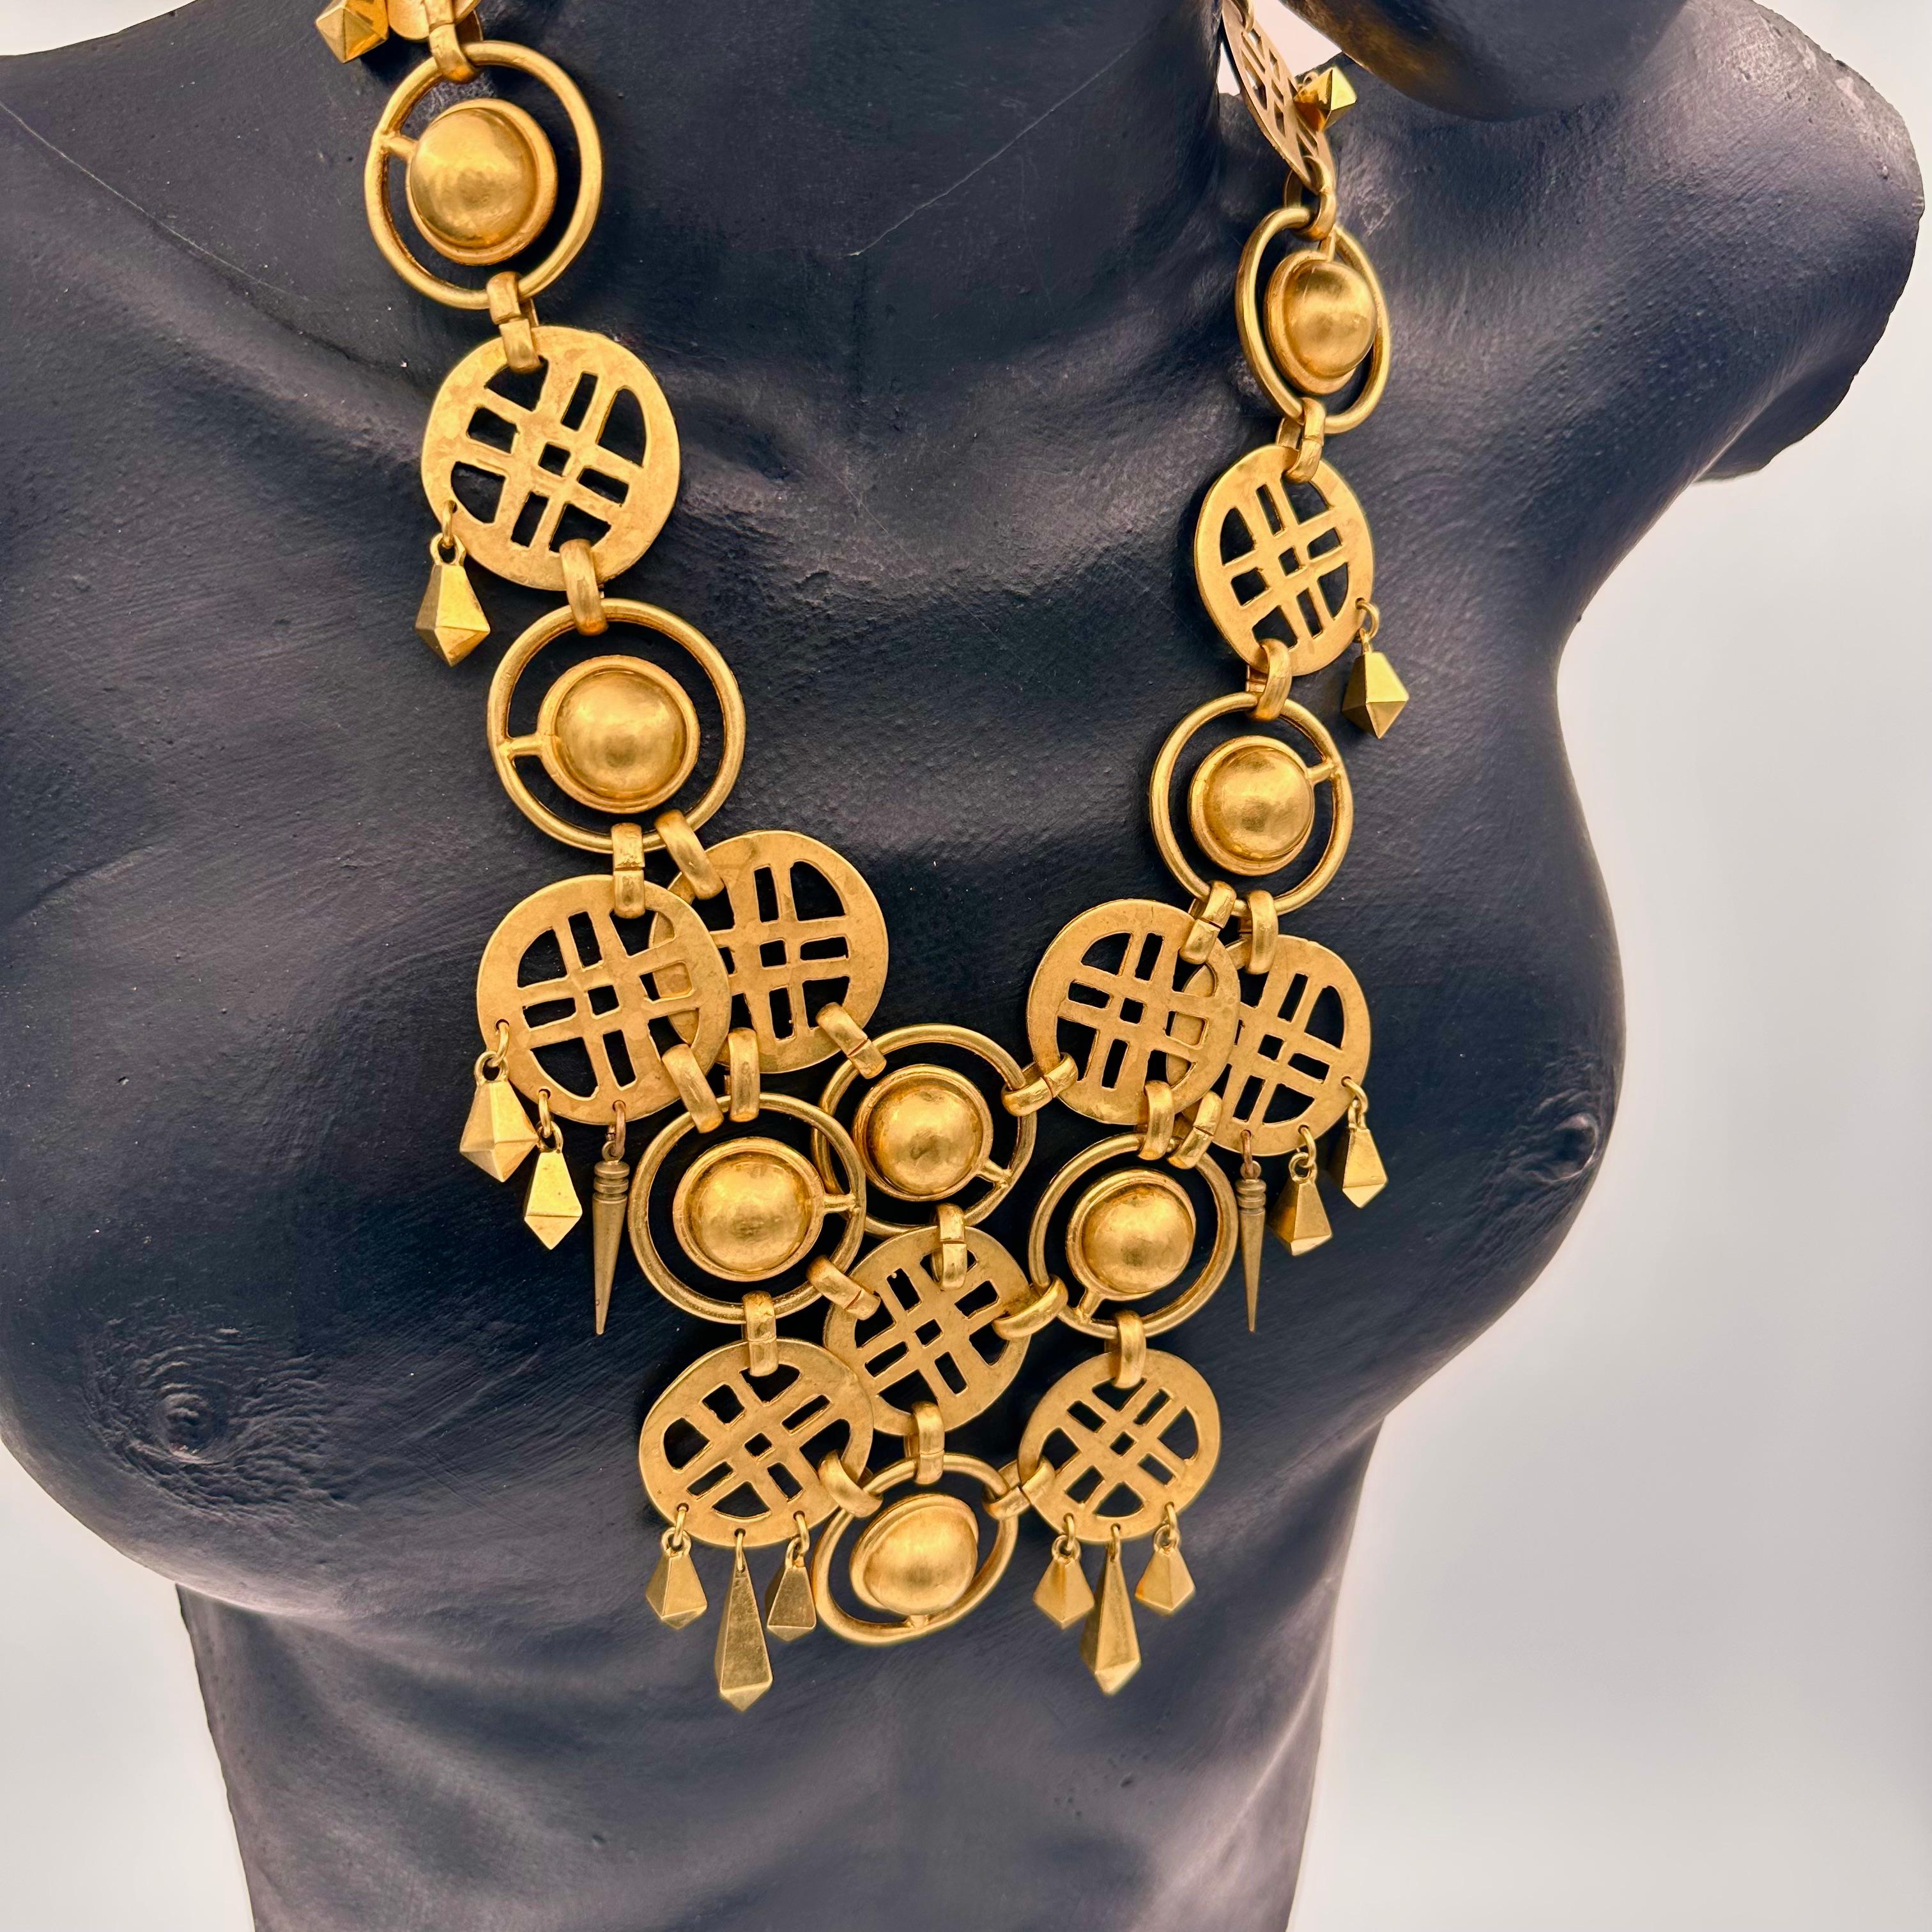 This is a configurations of gold plated brass crosshatched designs within circles and high domes surrounded by an orbiting ring, with chiseled fringe drops of solid brass, patterned into a high neck, short bib necklace. Simple hook clasp. One of a